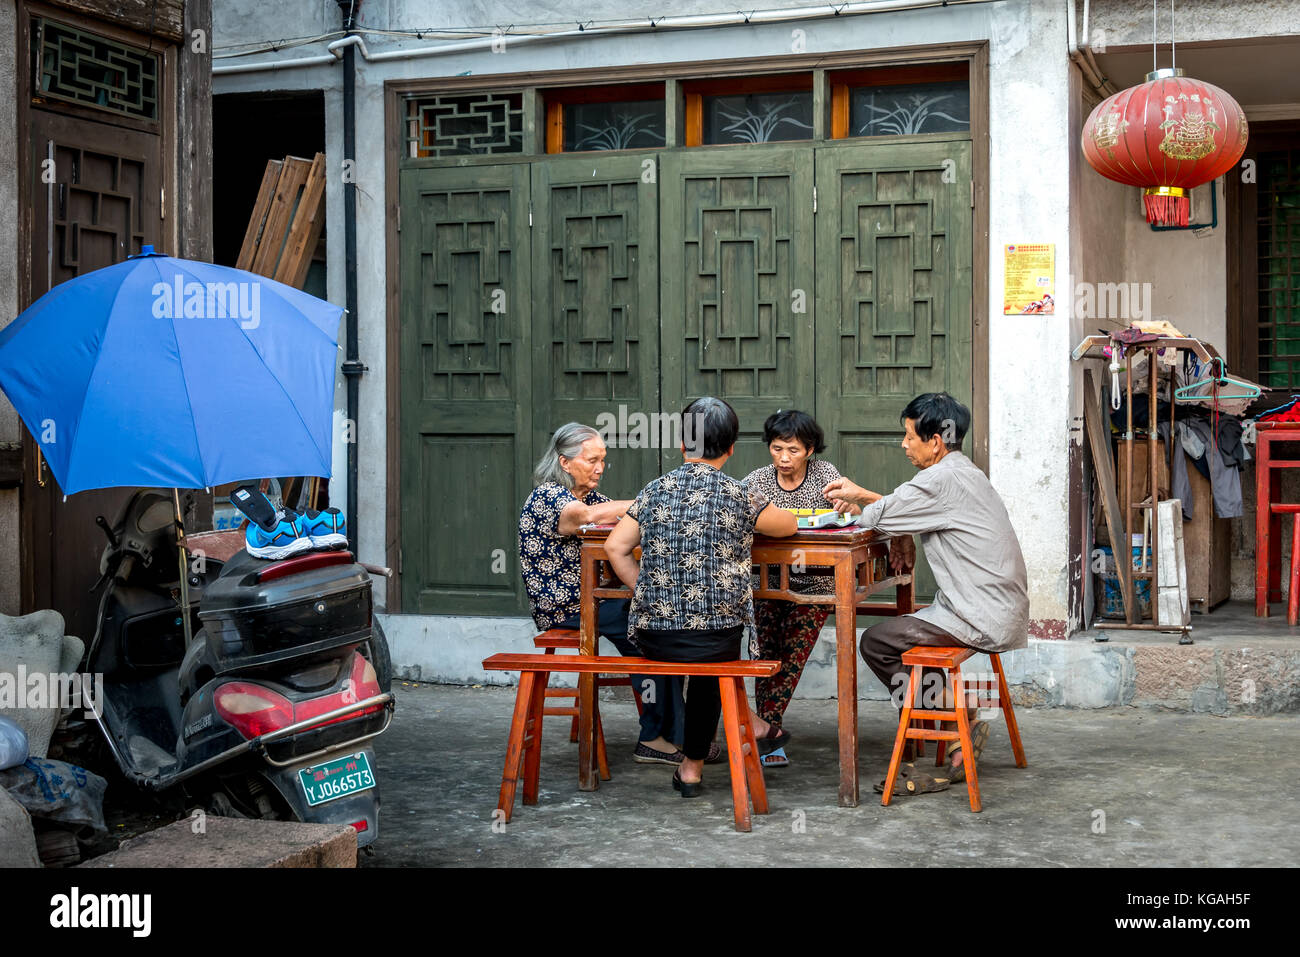 Four older Chinese people play a game at a wooden table in an alley at Cangpo Ancient Village, Yongjia County, Zhejiang Province, China, village life Stock Photo